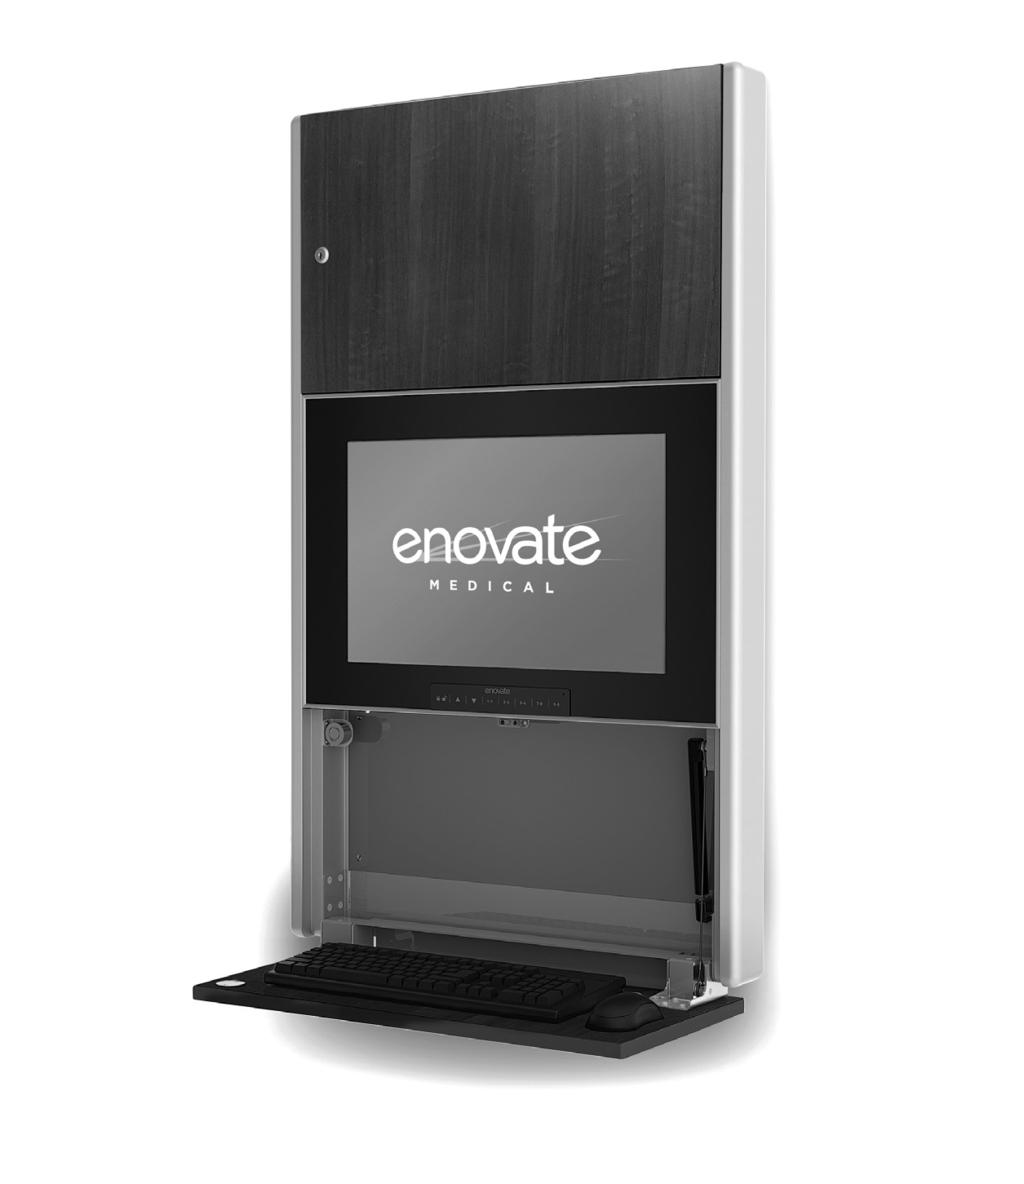 The Enovate Medical e550 Wallstation was designed to set a new standard in quality.